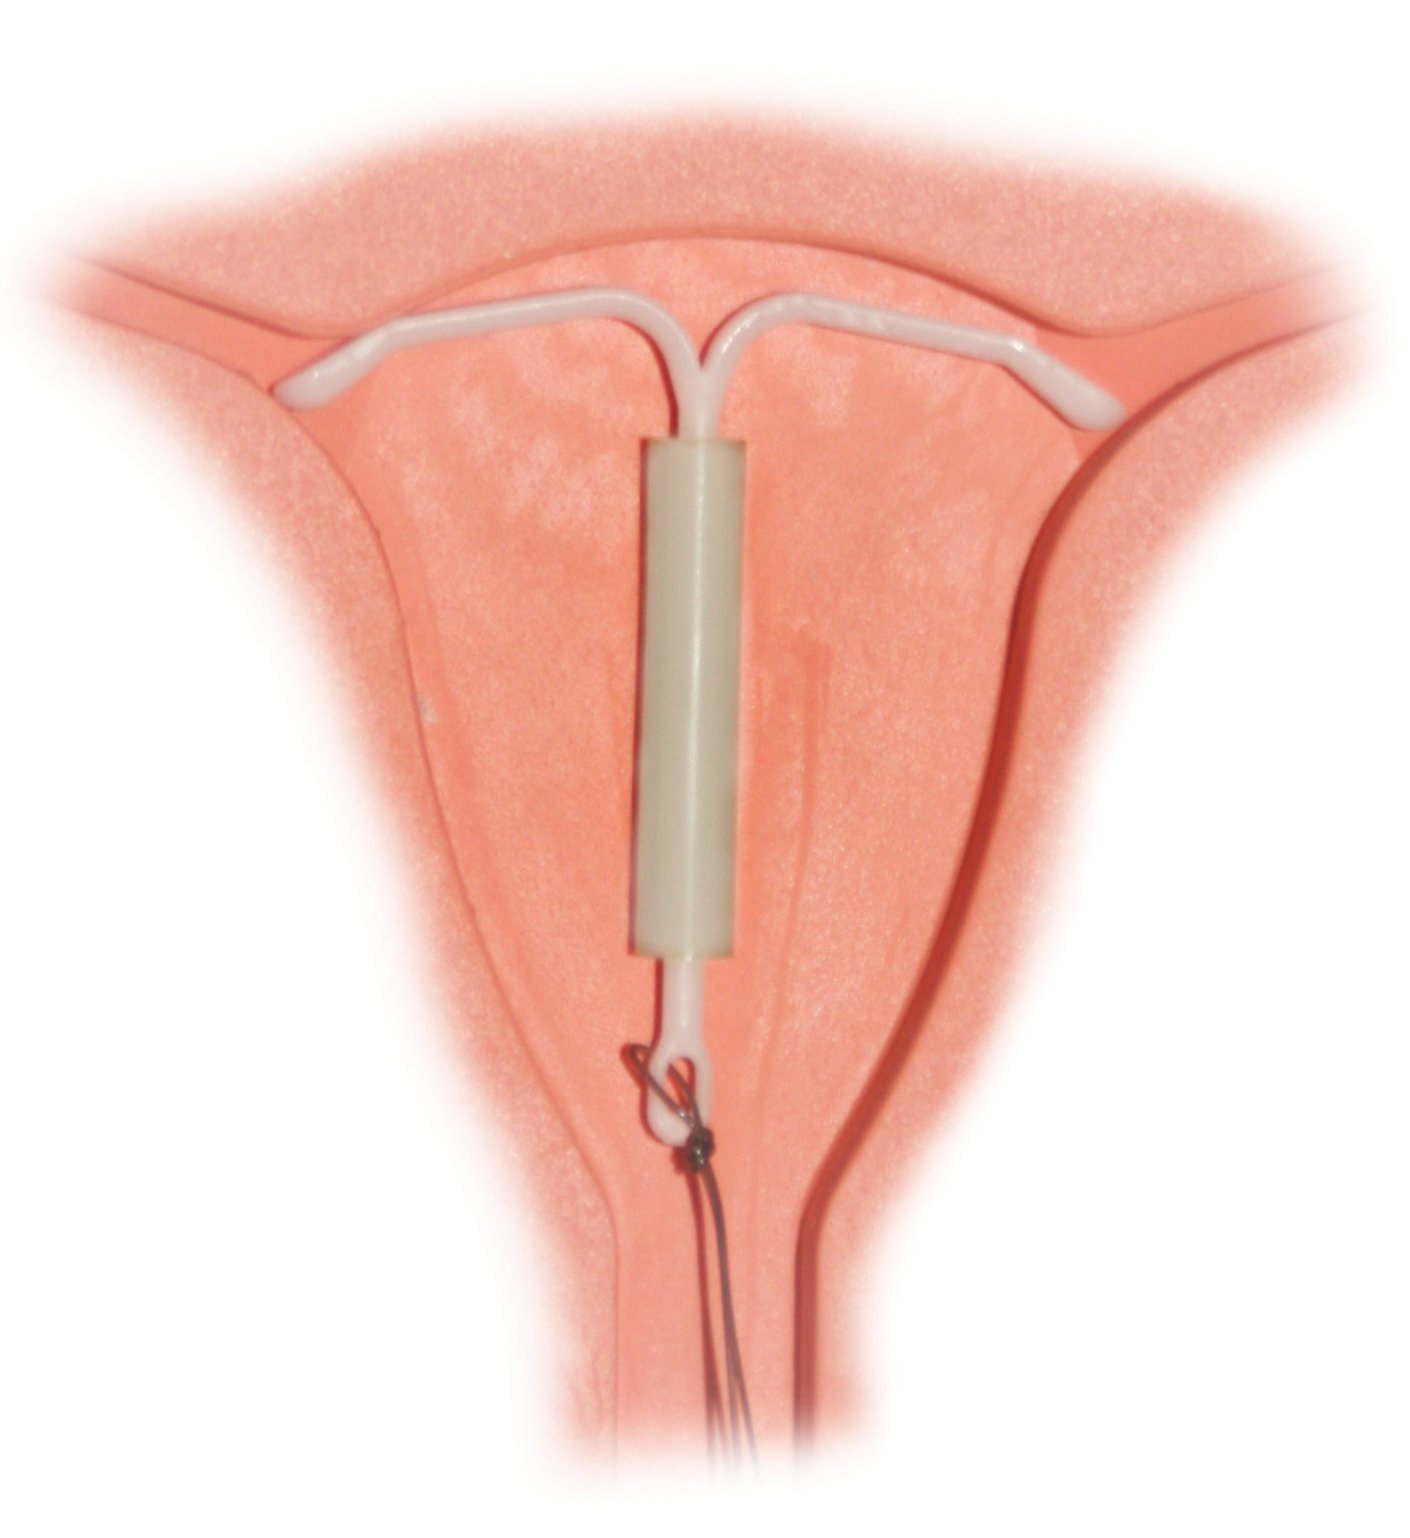 What Are The Side Effects Of Mirena IUD?